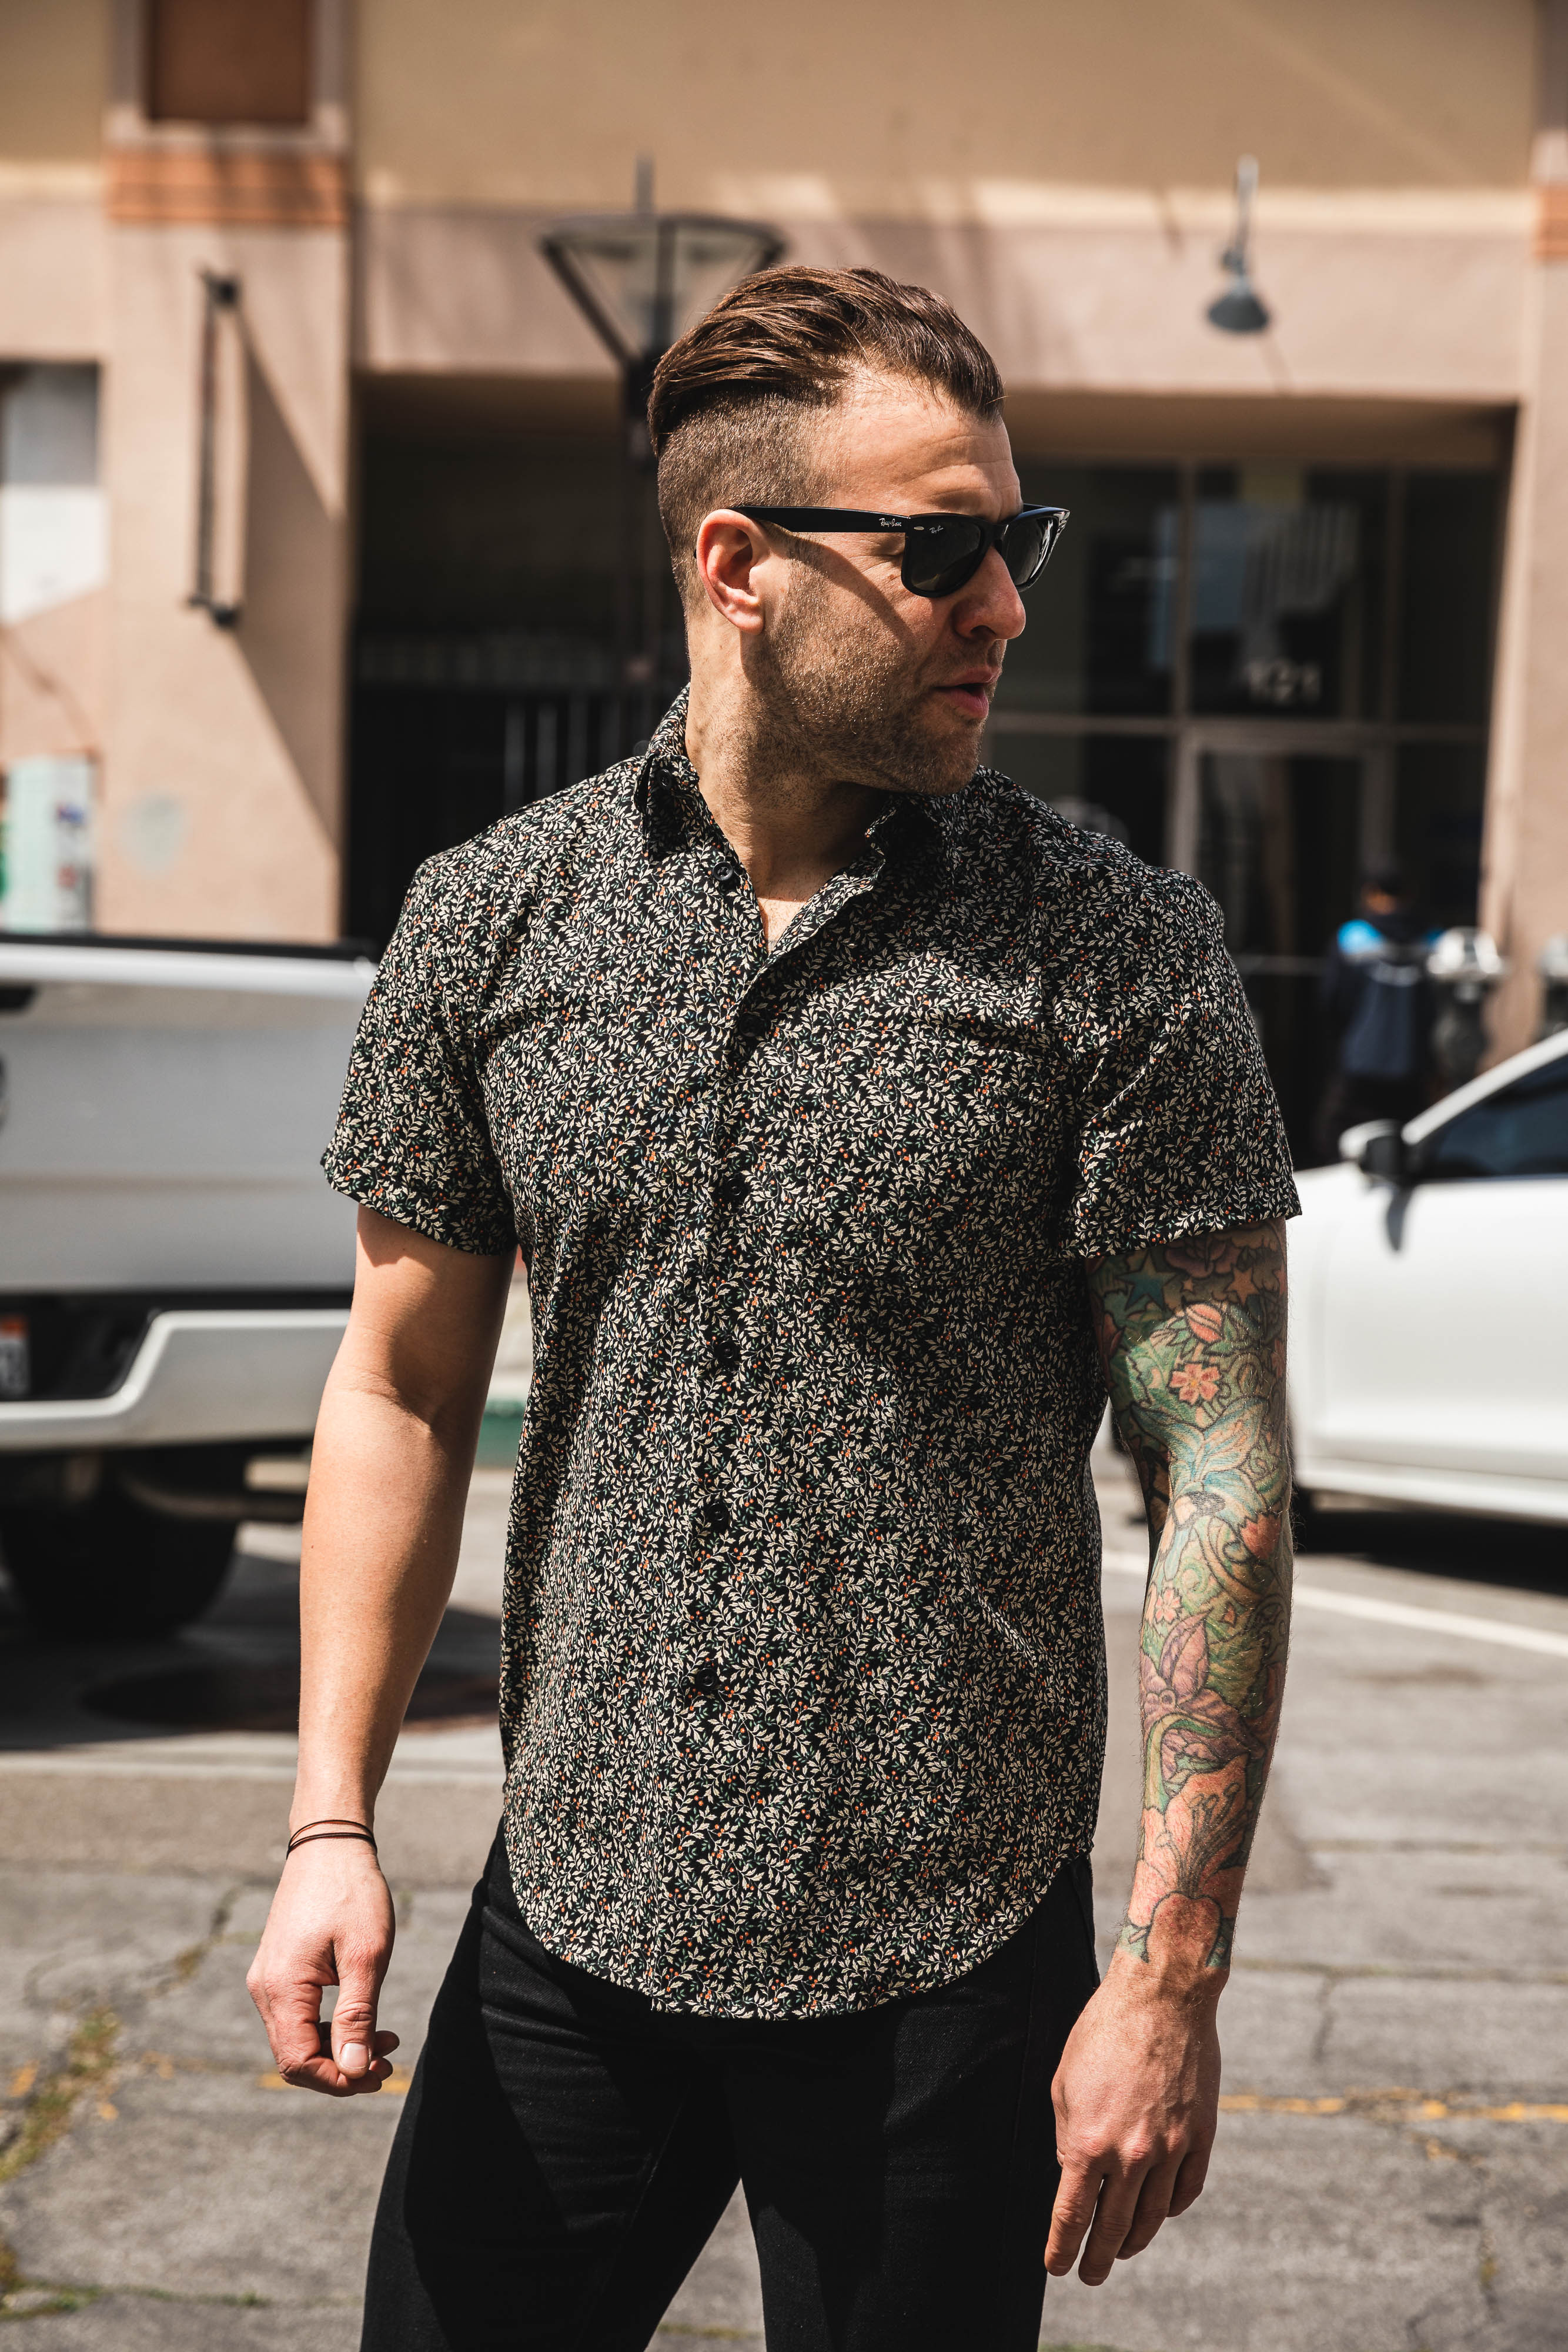 Naked & Famous - Short Sleeve Easy Shirt - Nuts & Berry - Black